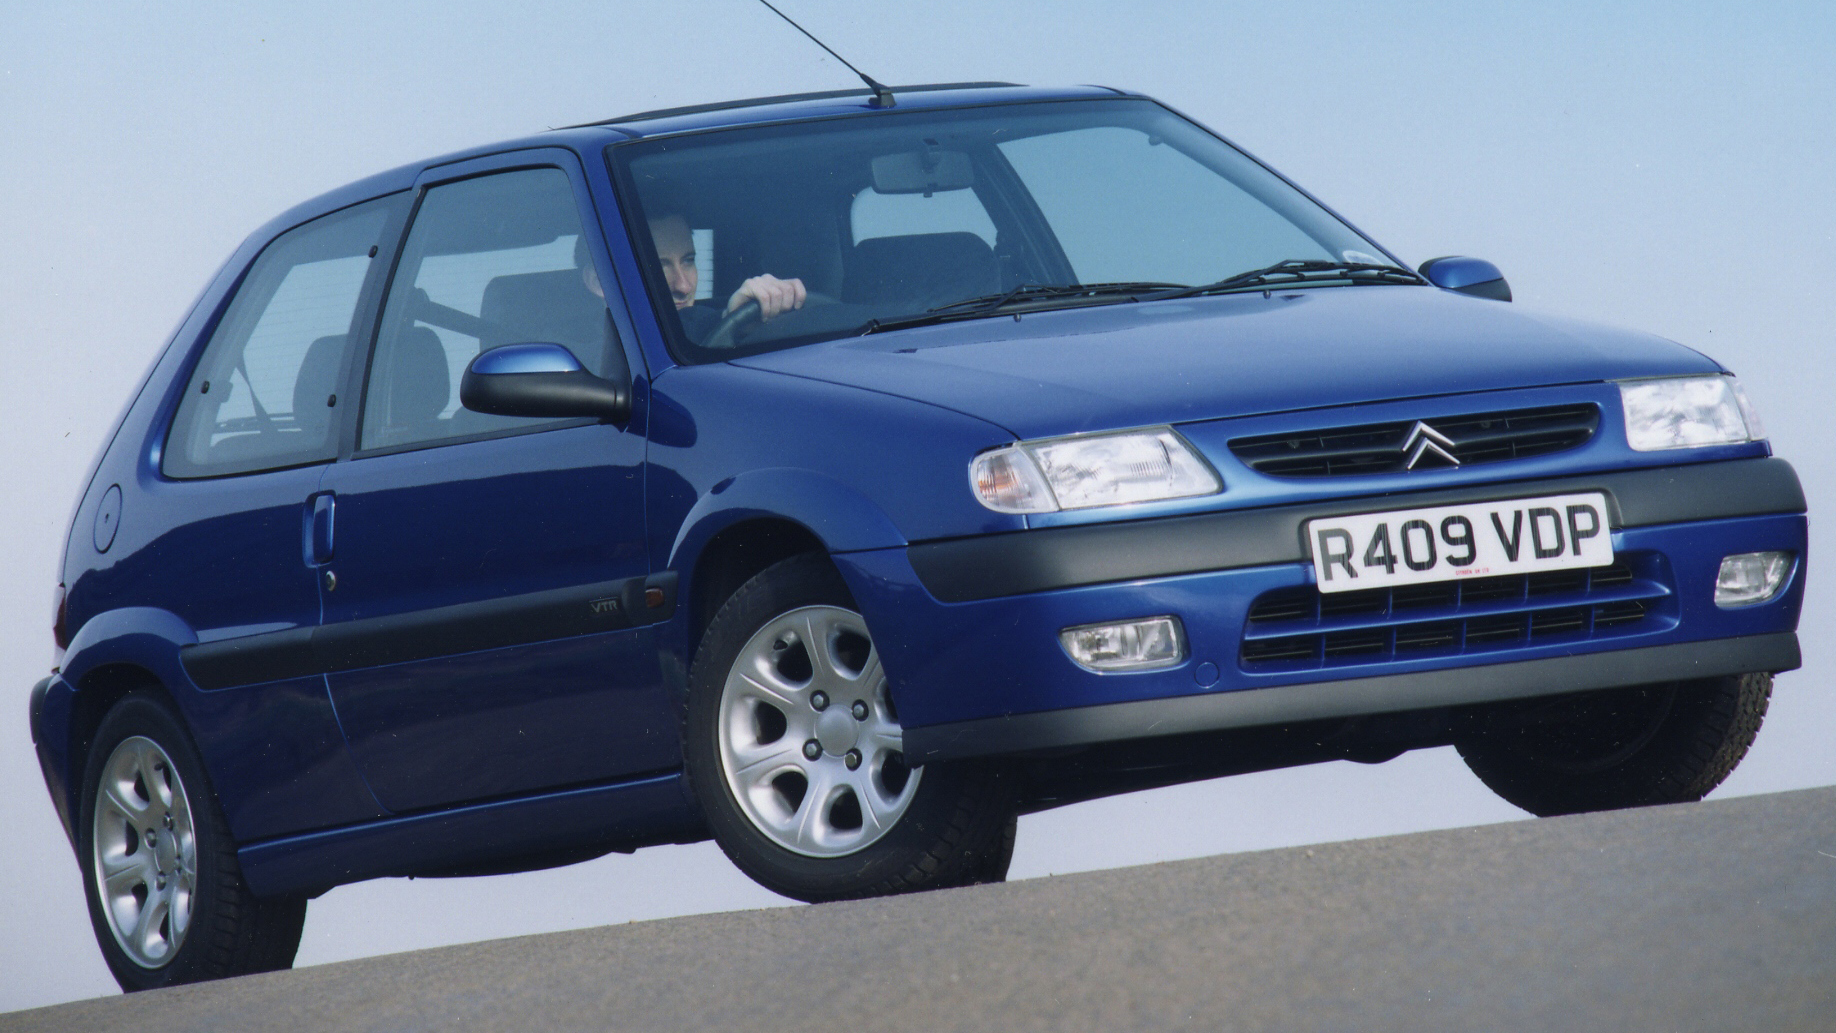 10 interesting used cars for under £5k we found this week